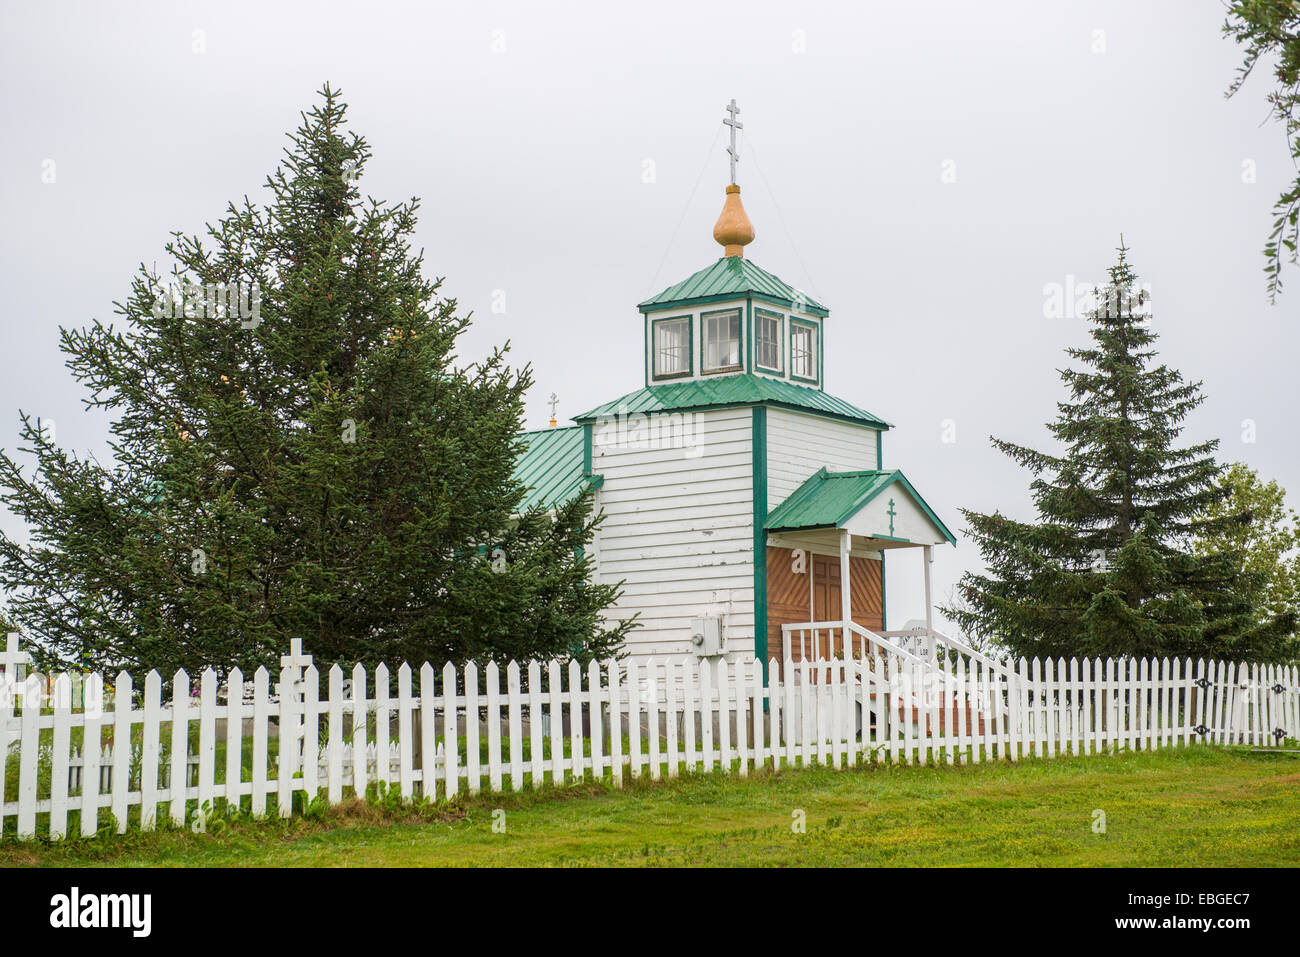 The Transfiguration of Our Lord Russian Orthodox Church with graveyard in Ninilchik, Alaska. Stock Photo